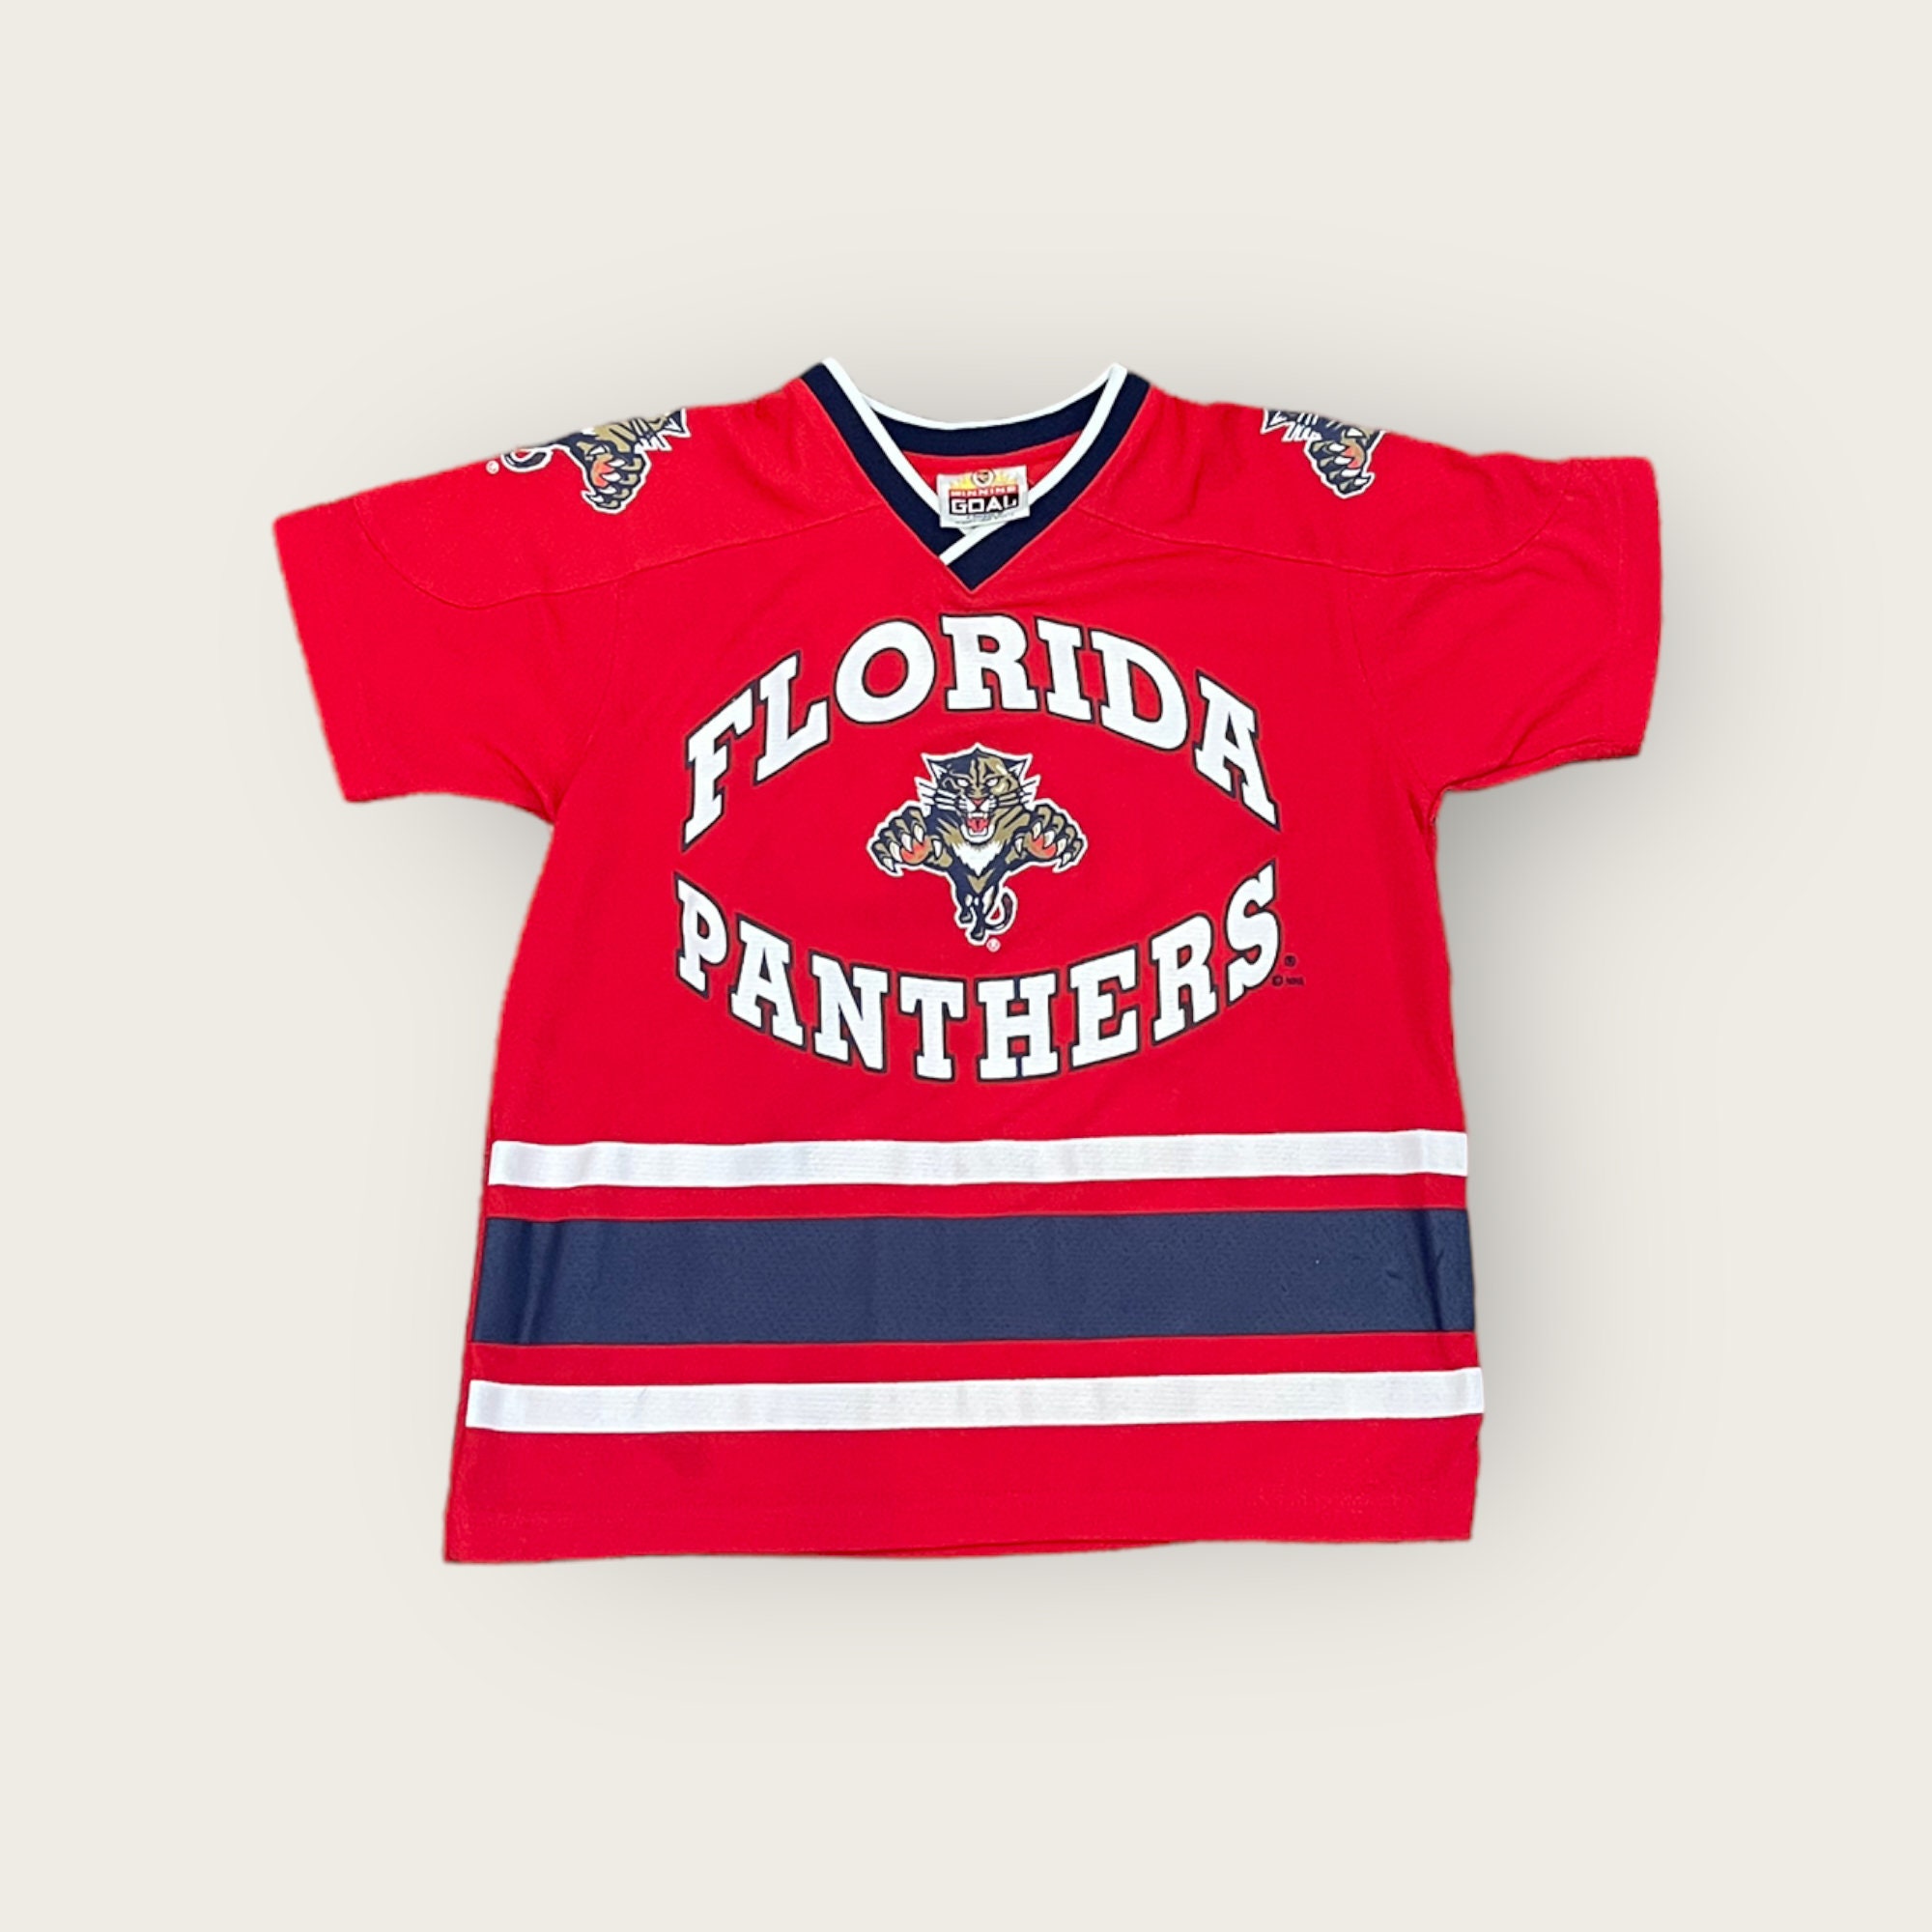 Custom Florida Panthers 90s Throwback Vintage NHL Away Sweatshirt Hoodie 3D  - Bring Your Ideas, Thoughts And Imaginations Into Reality Today